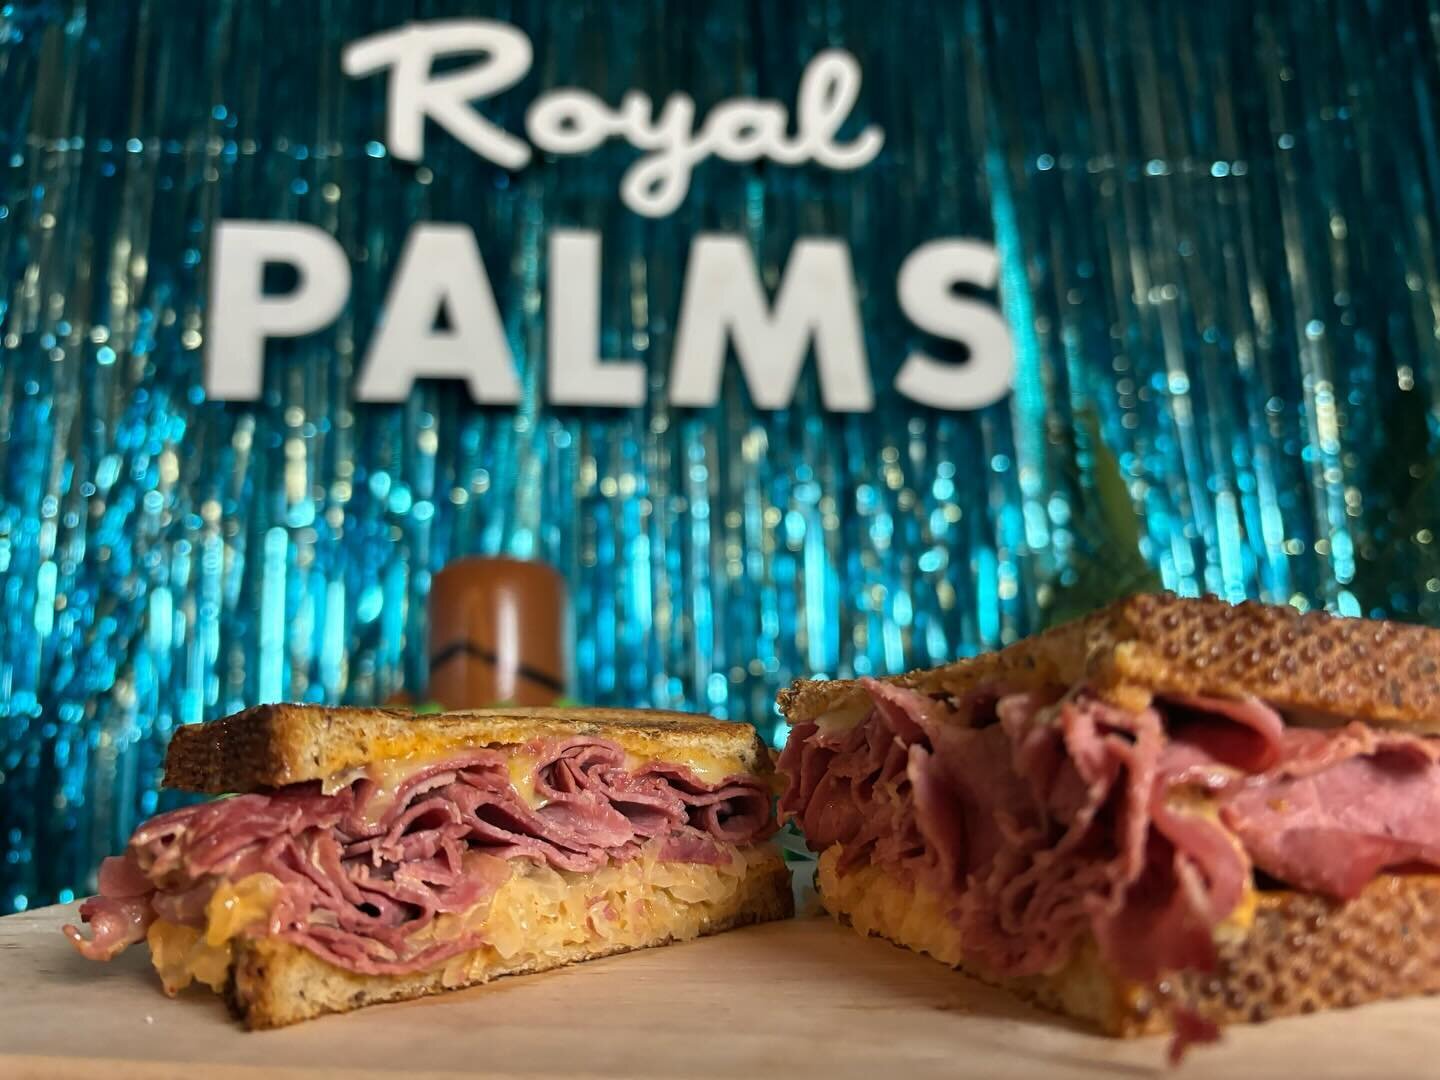 Come celebrate St. Patrick&rsquo;s Day with us @royalpalmschicago 

Get our special Reuben Sandwich this weekend only!
Thinly sliced corned beef, Swiss Cheese, Sauerkraut and our House-Made Tangy Creole Remoulade on Rye Bread.☘️